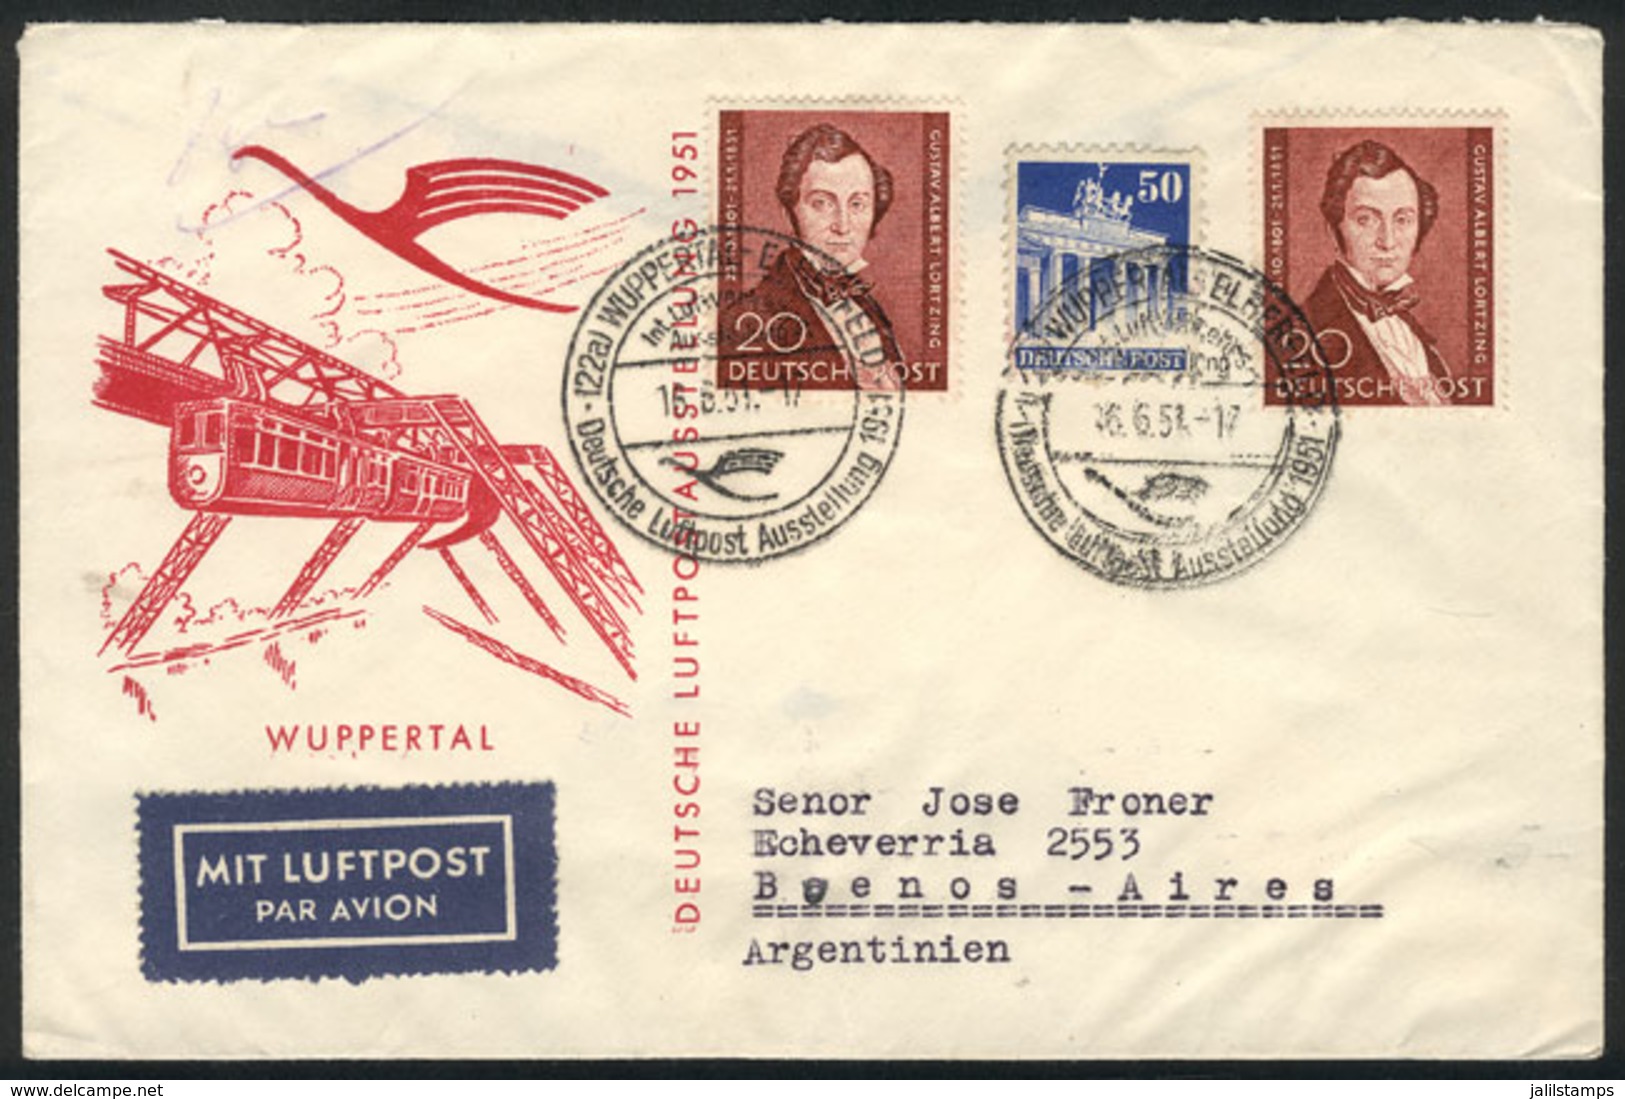 WEST GERMANY: Airmail Cover Sent To Argentina On 16/JUN/1951 With Very Good Postage, Excellent Quality! - Briefe U. Dokumente